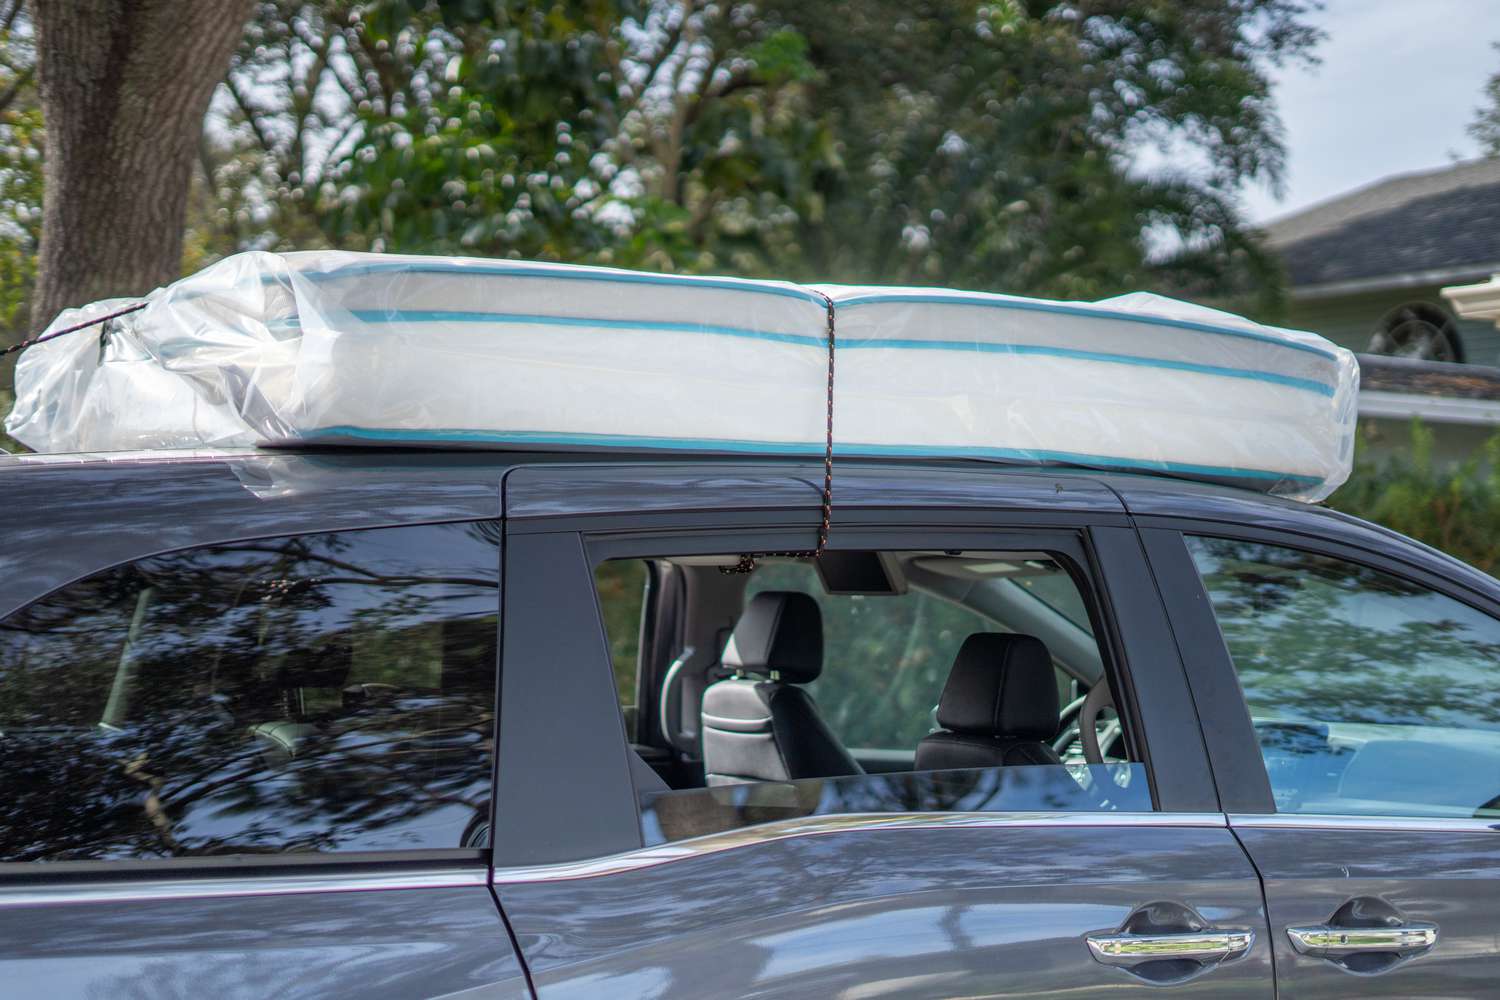 How To Tie A Mattress To A Car Roof Rack